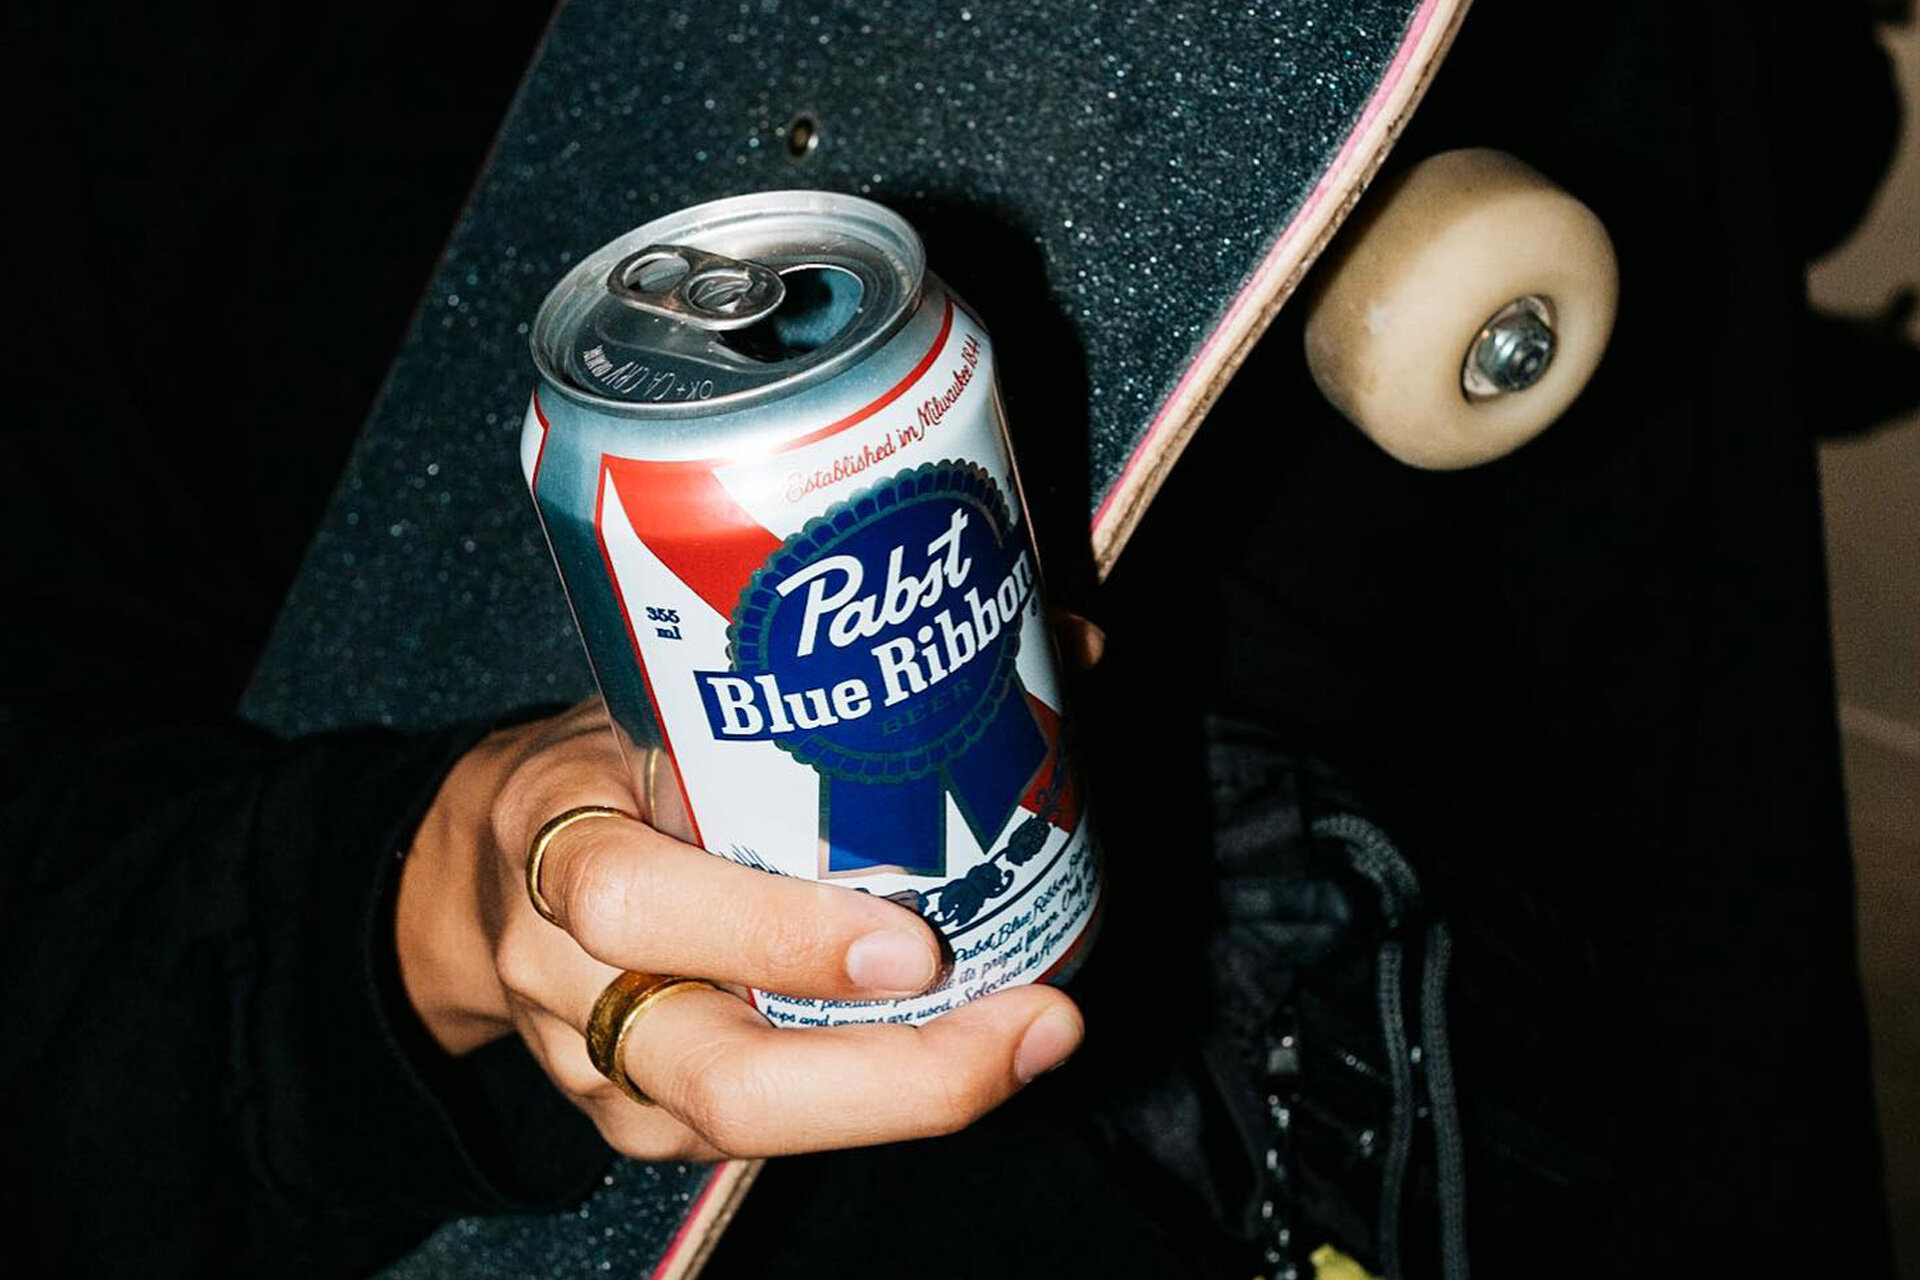 the-strategy-behind-pabst-blue-ribbon-s-decade-of-growth-the